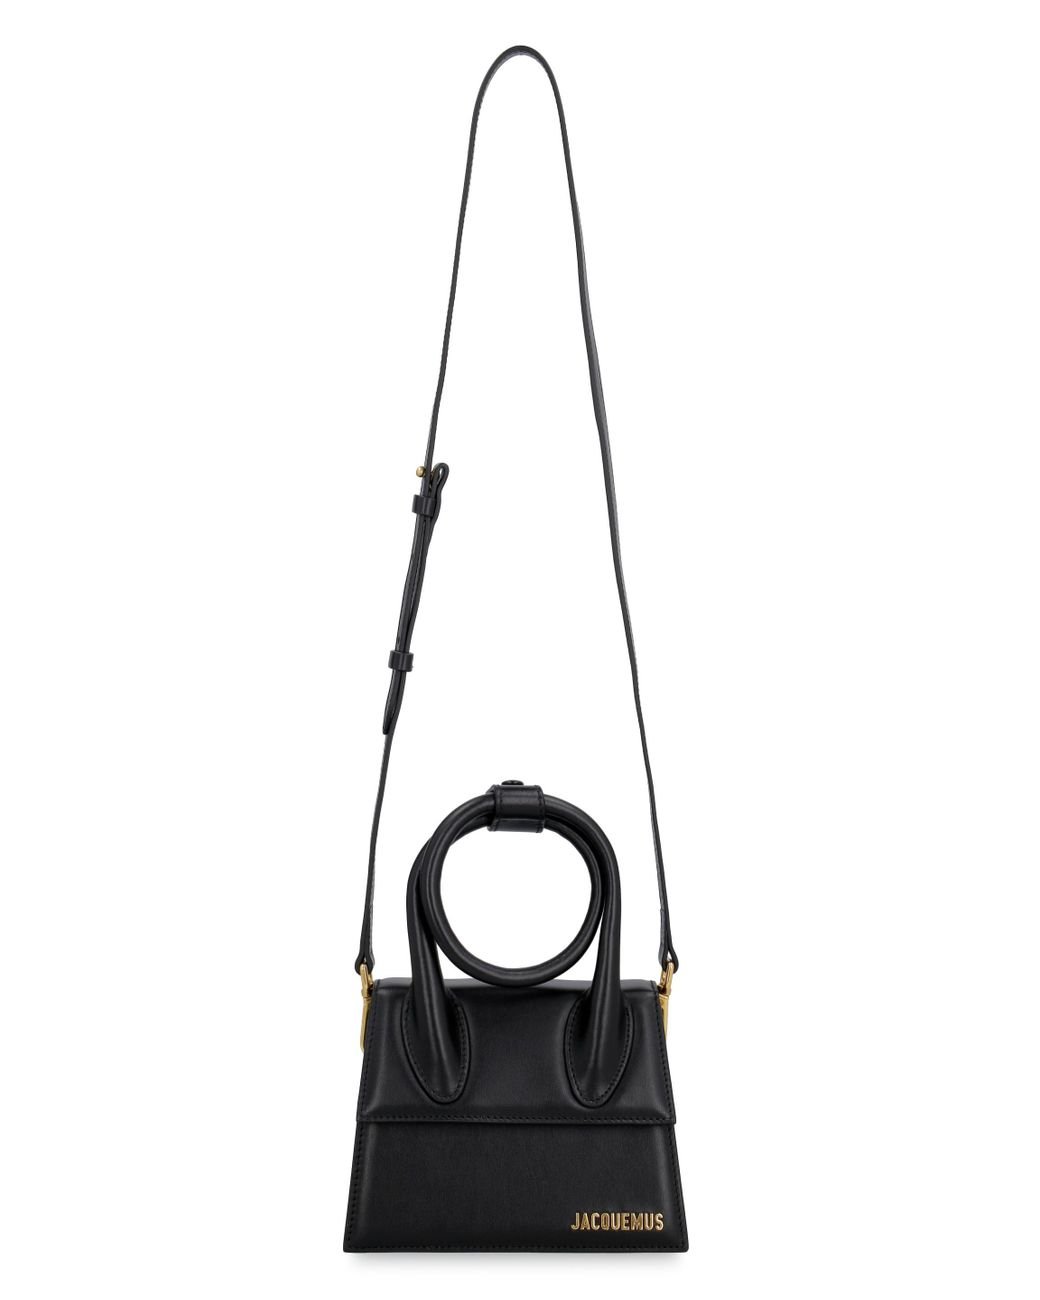 Jacquemus Canvas Le Chiquito Noeud Leather Bag in Black - Lyst